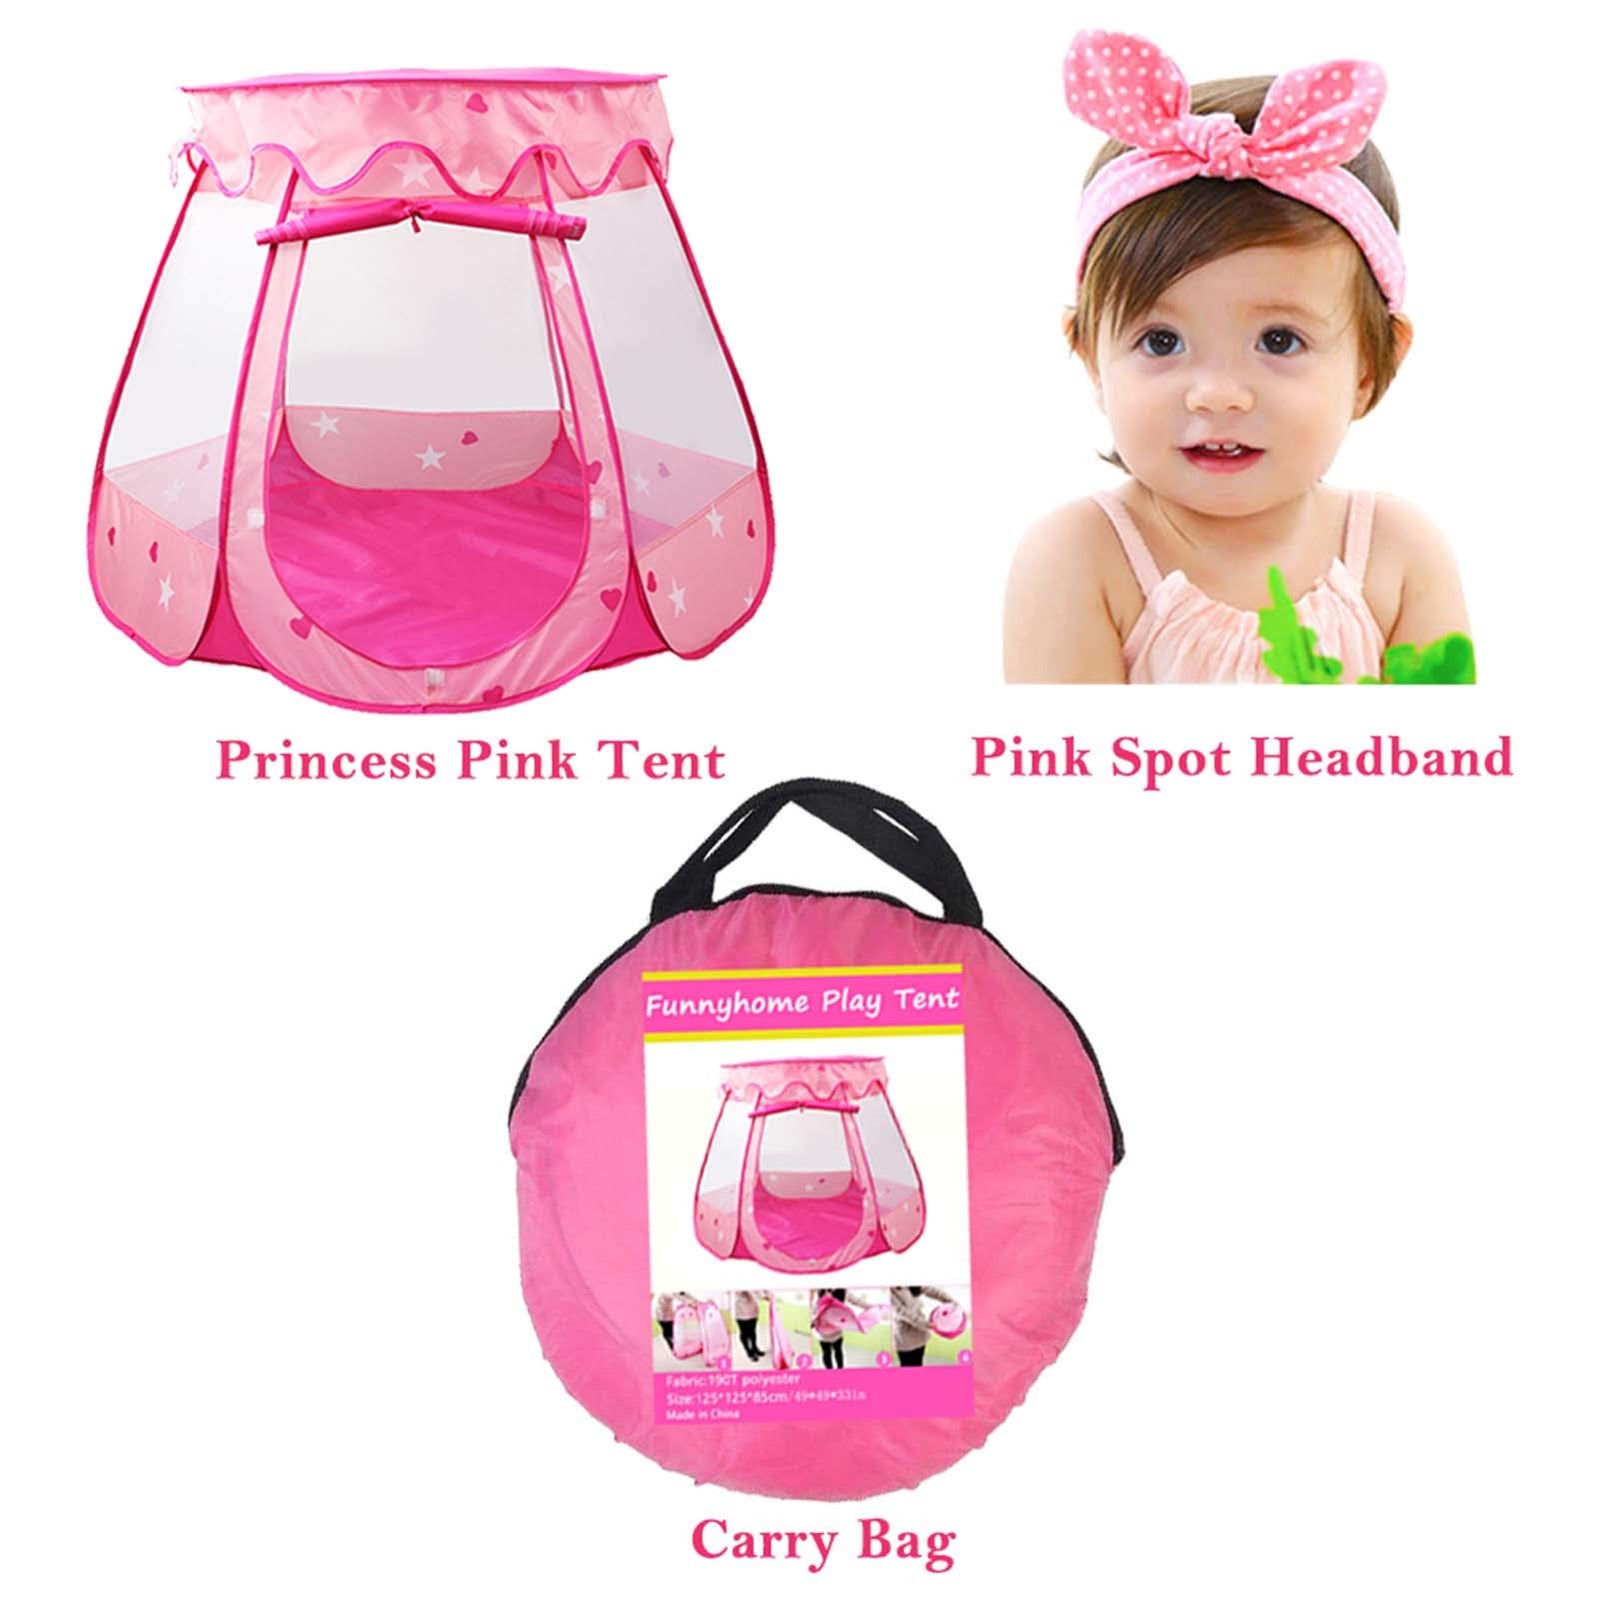 Le Papillon Pink Princess Tent Kids Ball Pit 1st Gift Toddler Girl Easy Pop Up Fold into a Carrying Case Play Tent Indoor & Outdoor Use.(Balls Not Included)